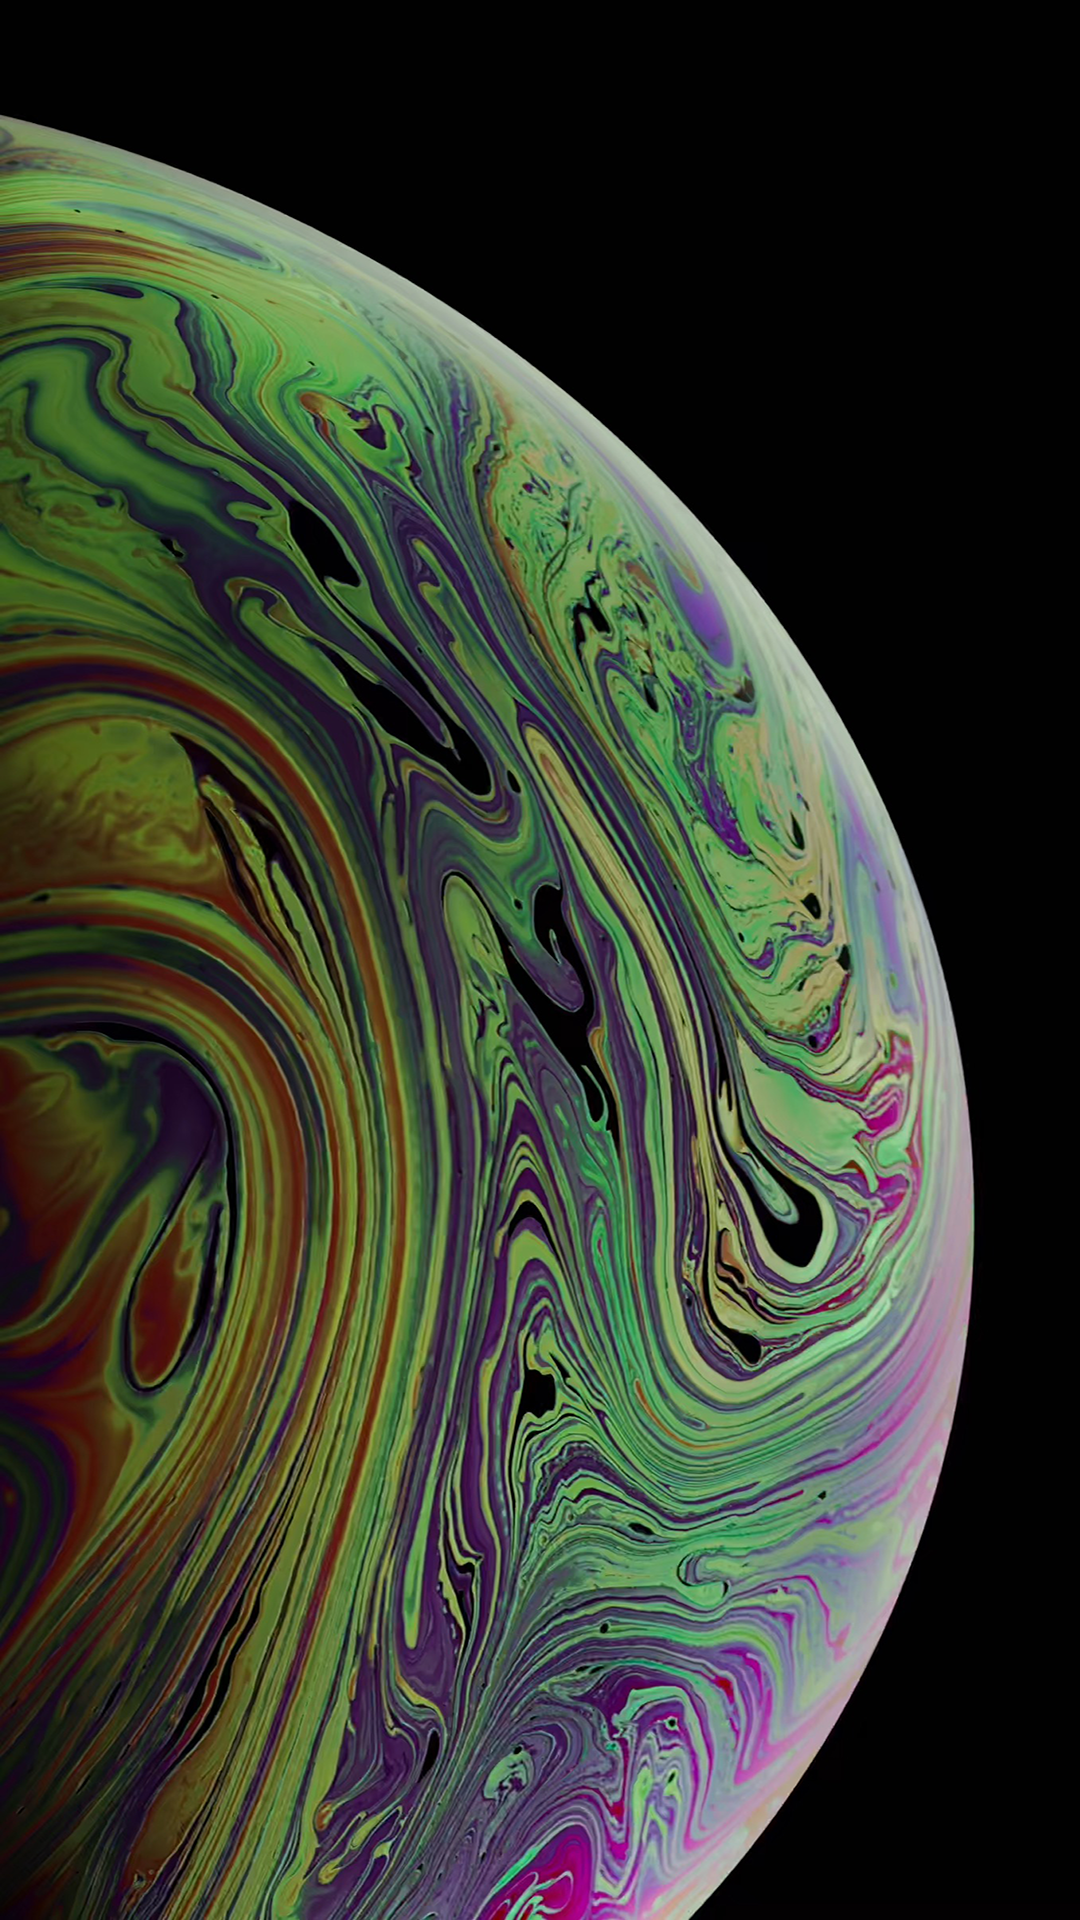 Wallpapers iPhone Xs iPhone Xs Max and iPhone Xr